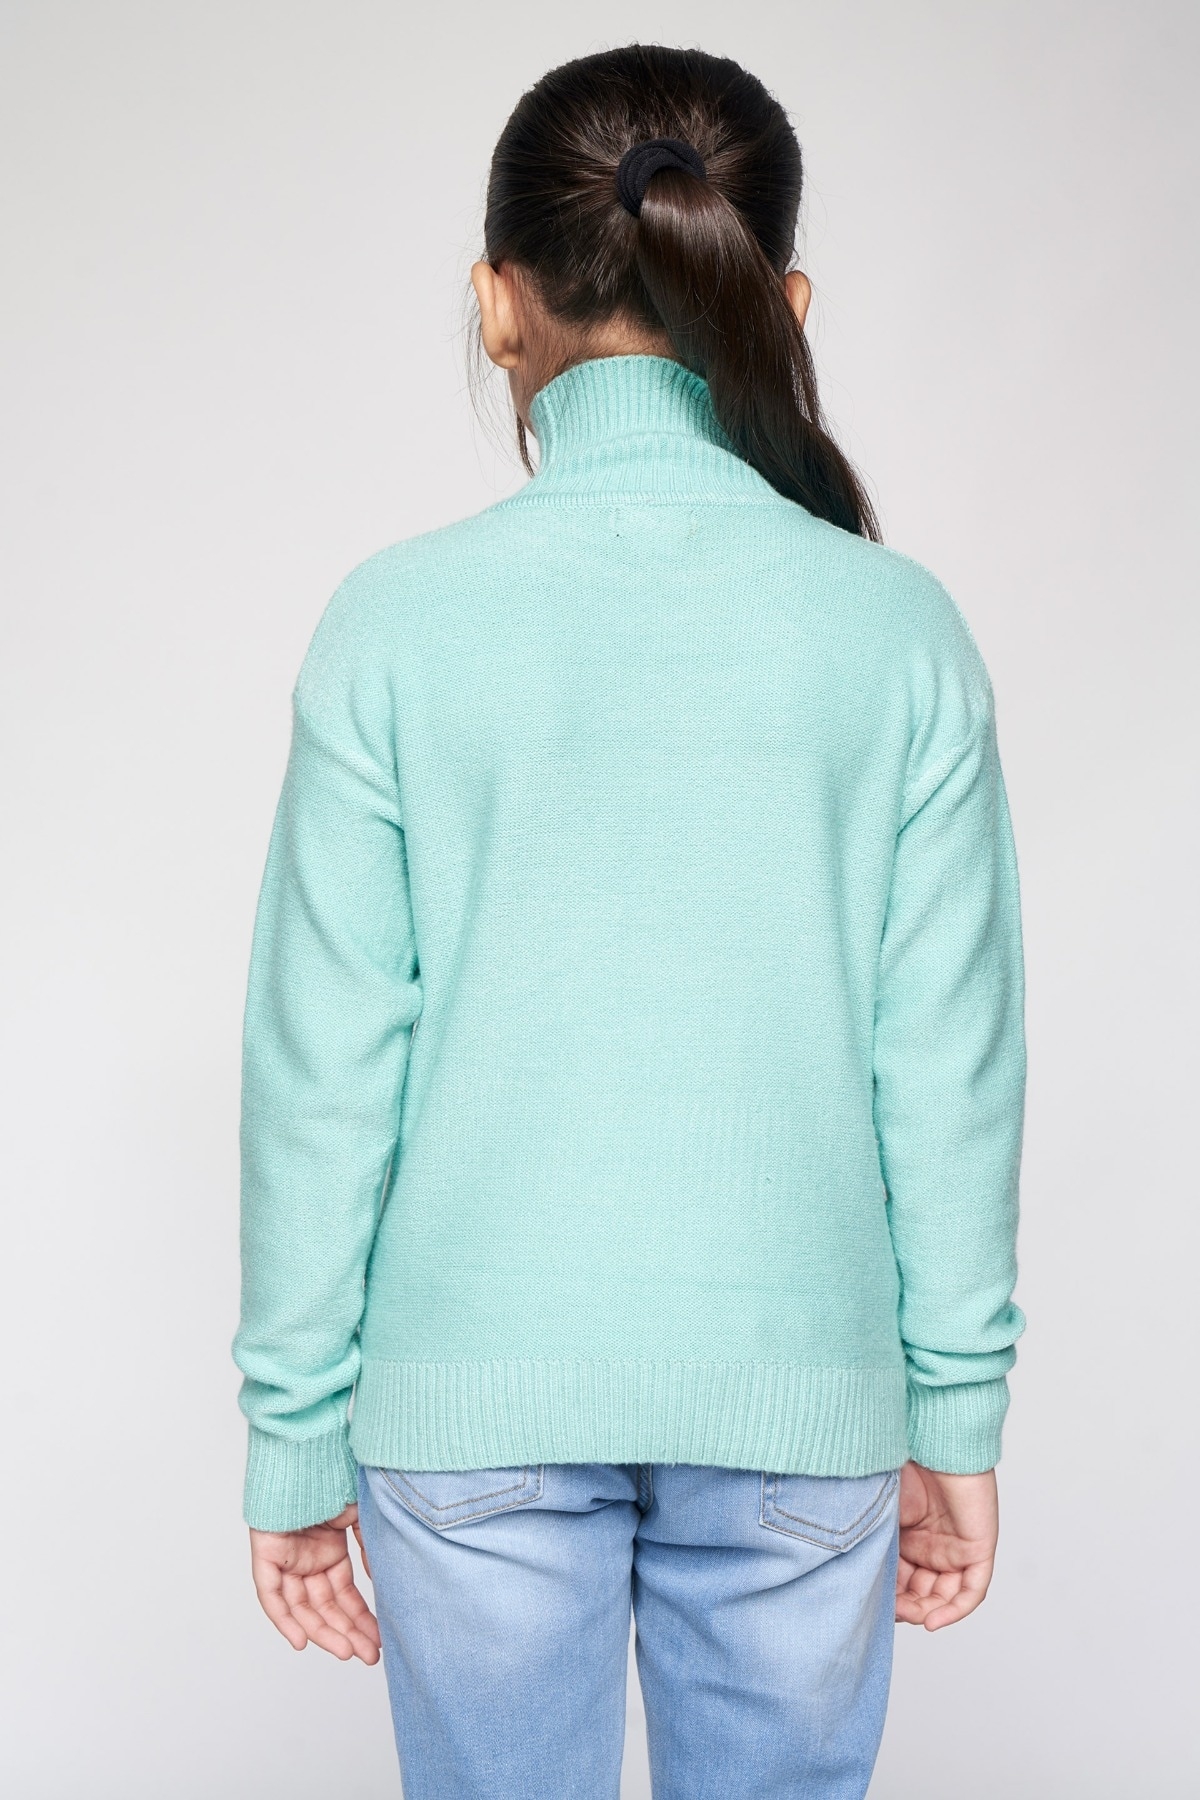 AND | Sage Green Solid Straight Top 2